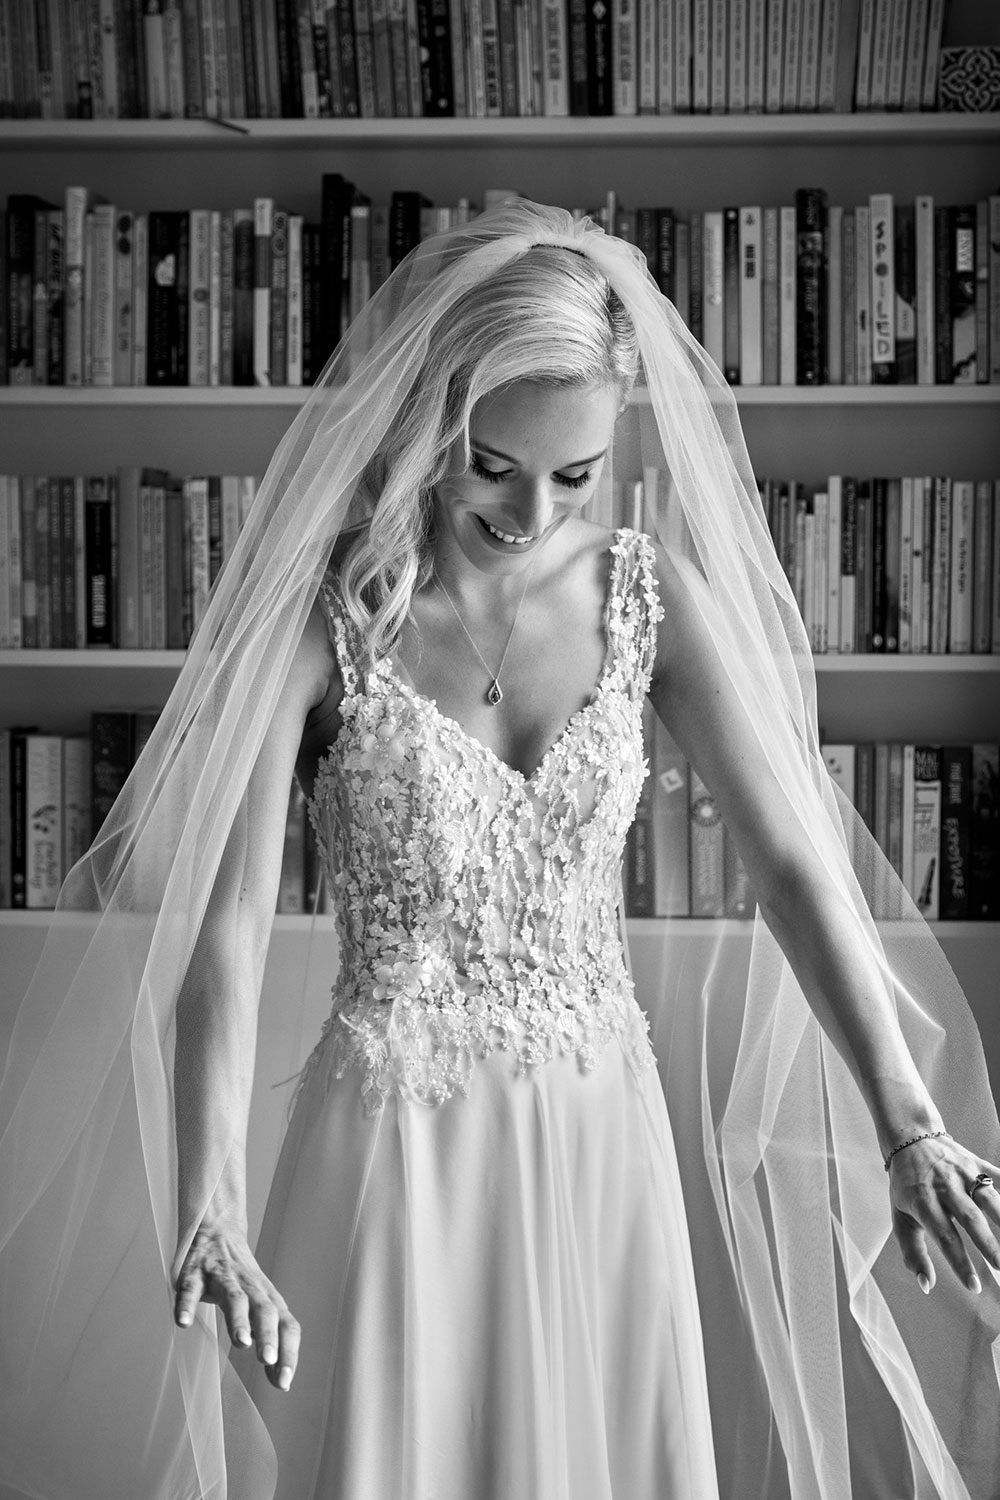 Bride wearing bespoke gown made of silk chiffon with delicate flower lace bodice by Vinka bridal designer Auckland - black and white with veil on